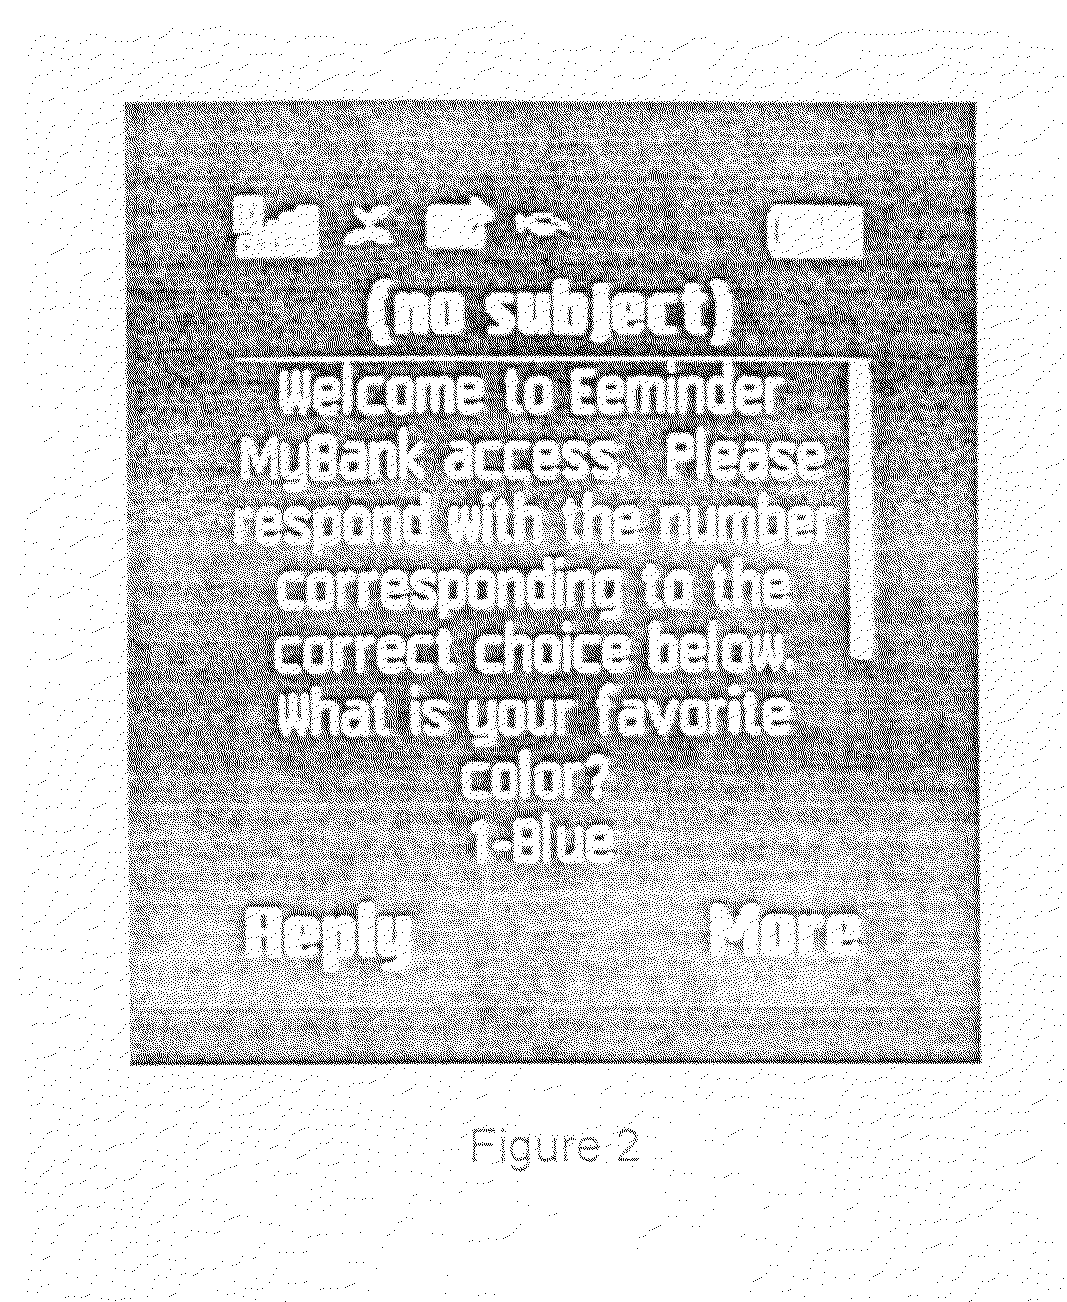 Method and system for using message based security challenge and response questions for multi-factor authentication in mobile access to electronic information